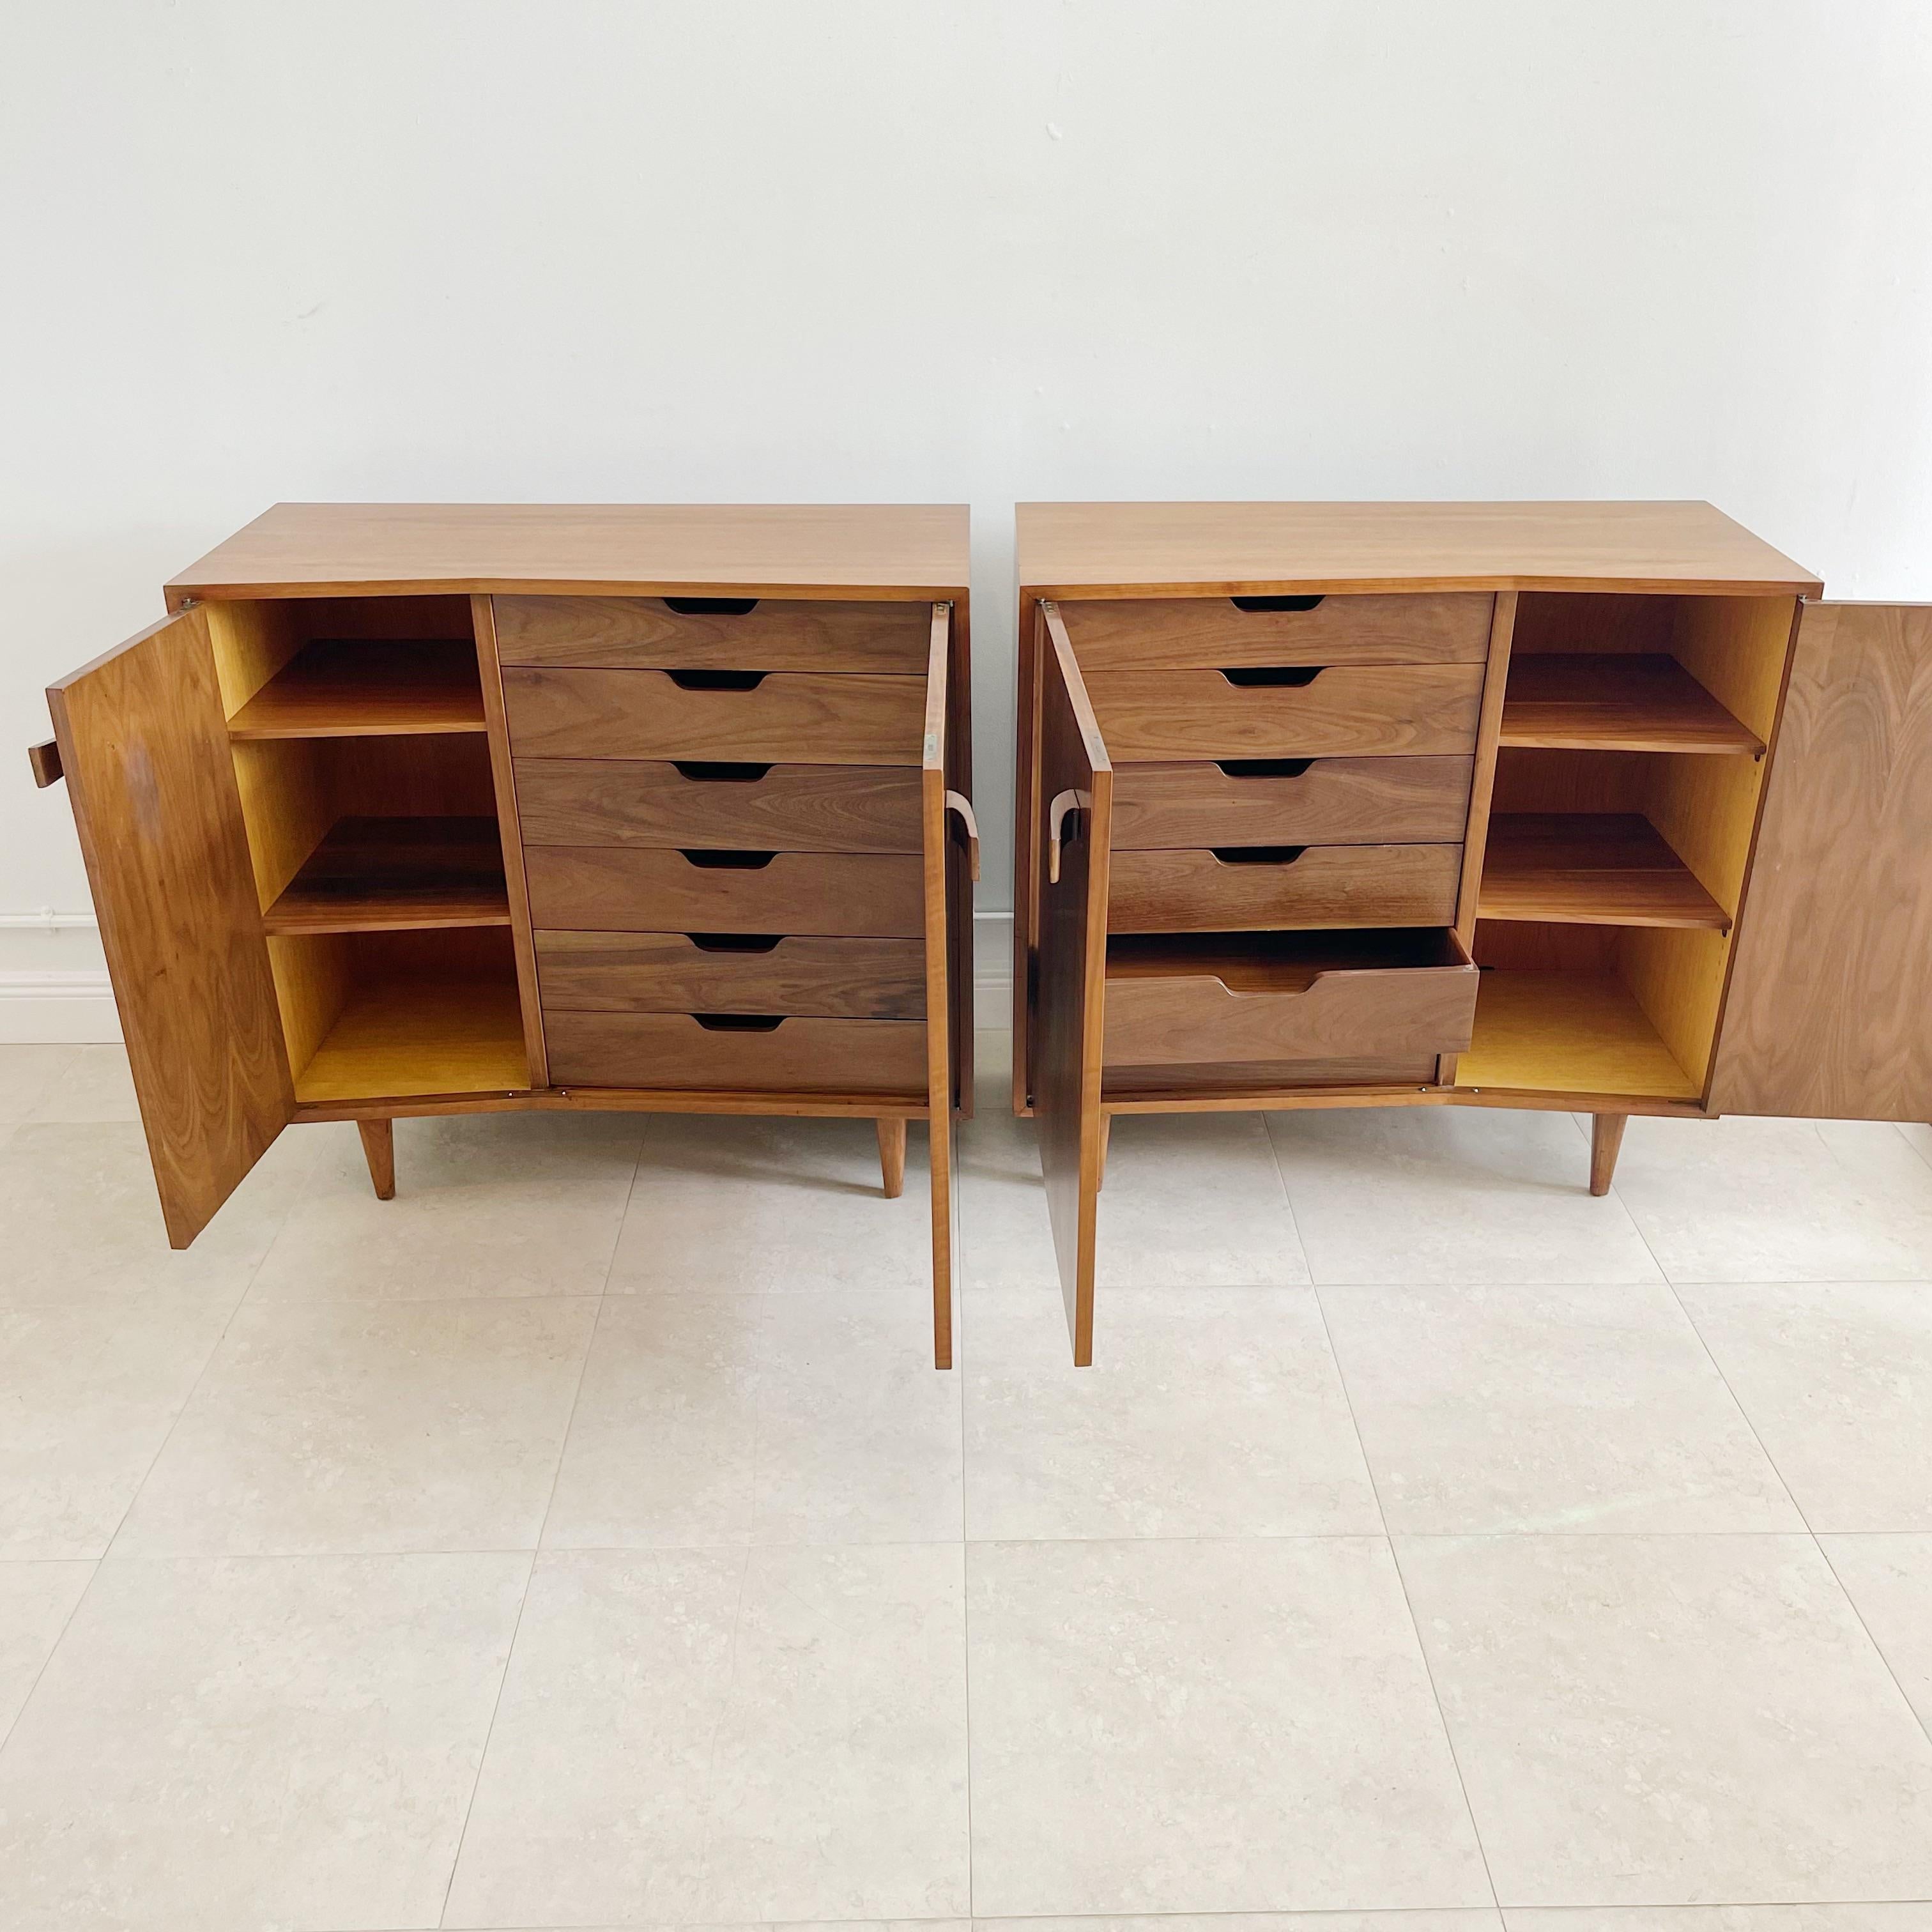 Hand-Crafted Pair Bertha Schaefer for Singer and Sons Asymmetrical Chest of Drawers Cabinets